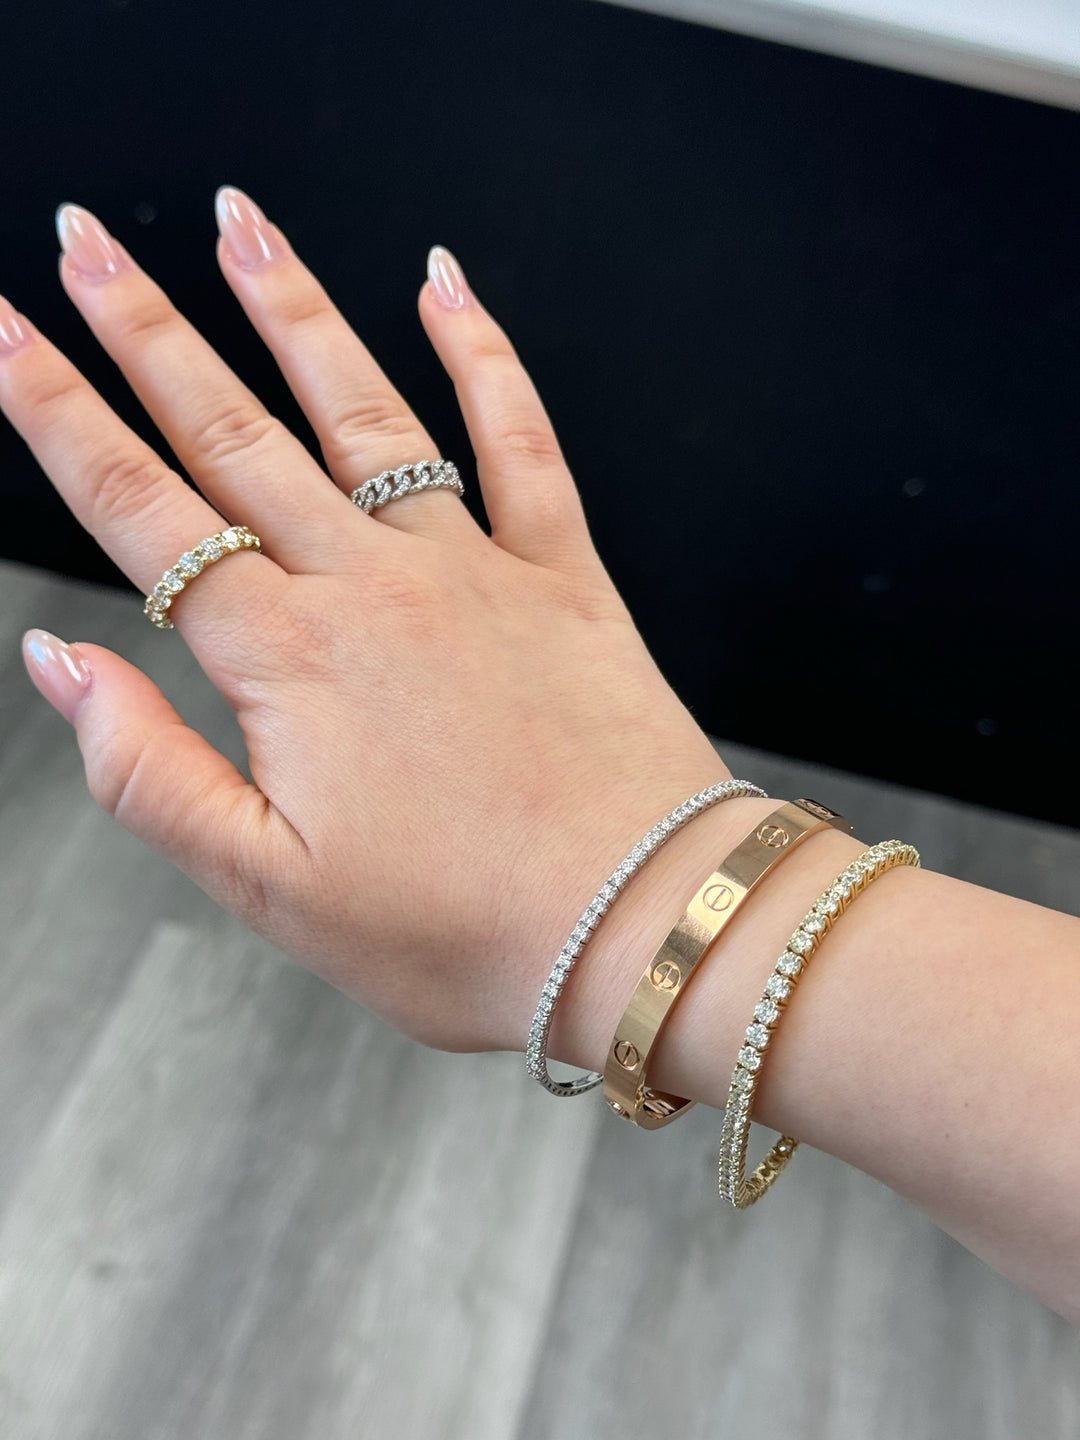 Looking for the Perfect Stackable Bangle for Your Cartier Love Bracelet?